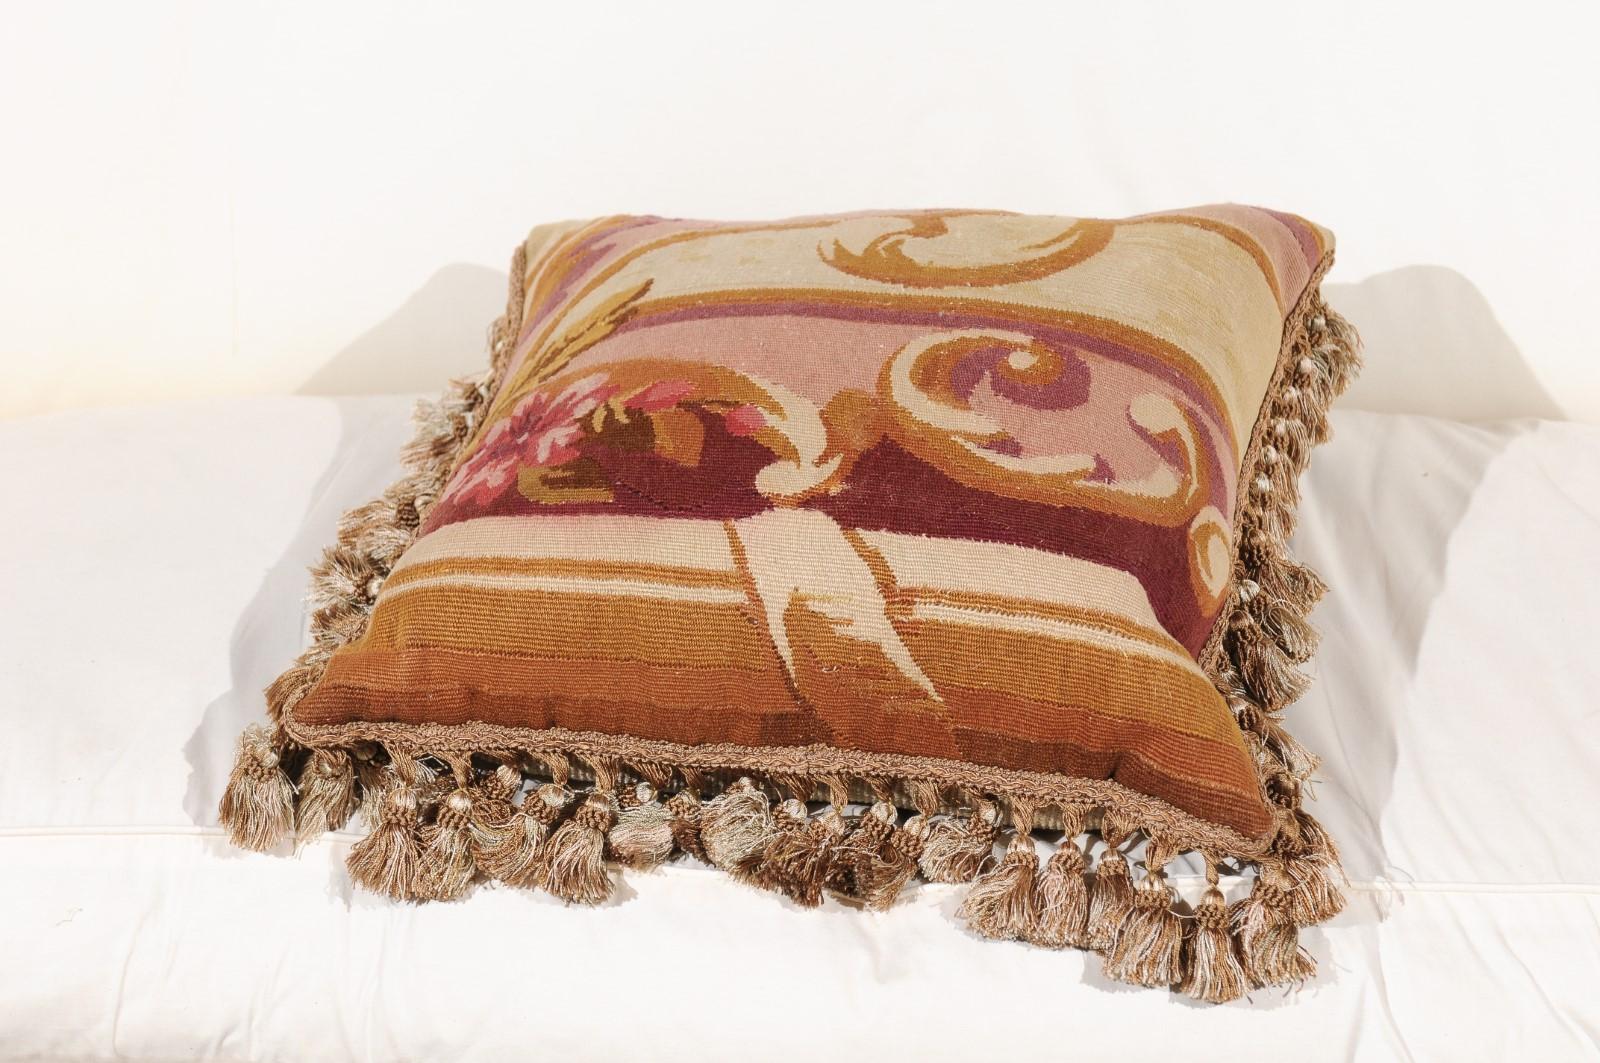 French 19th Century Aubusson Tapestry Pillow with Tassels and Floral Décor For Sale 7